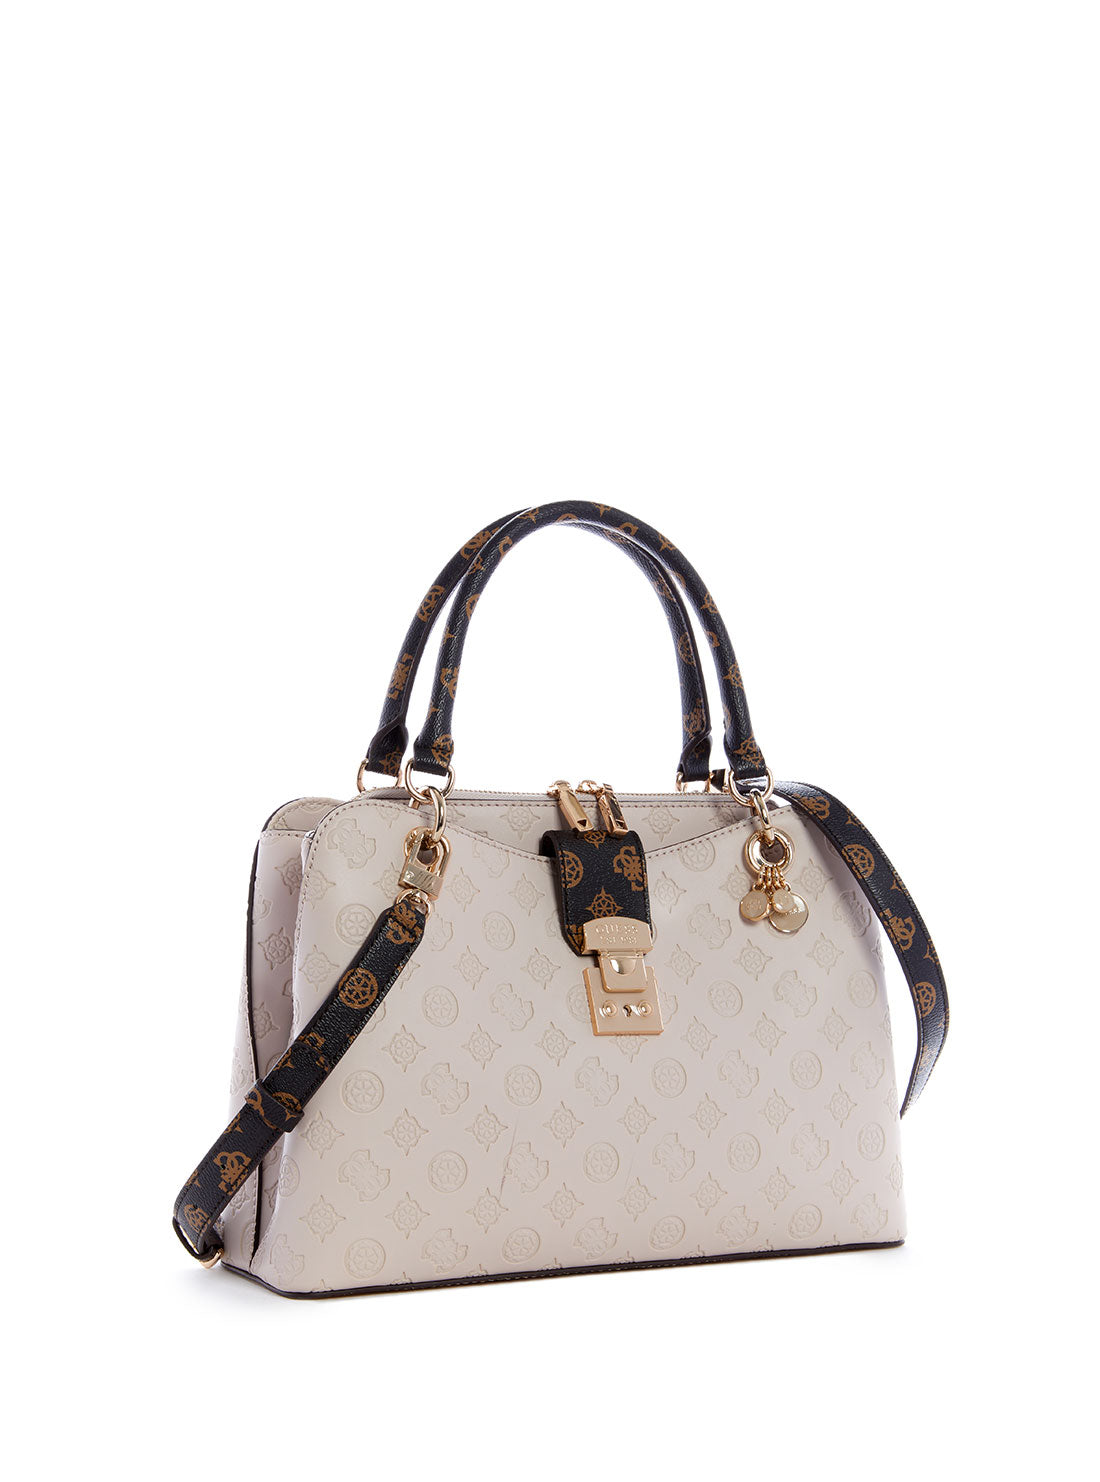 GUESS Women's Stone Carlson Girlfriend Satchel PG839806 Front Side View